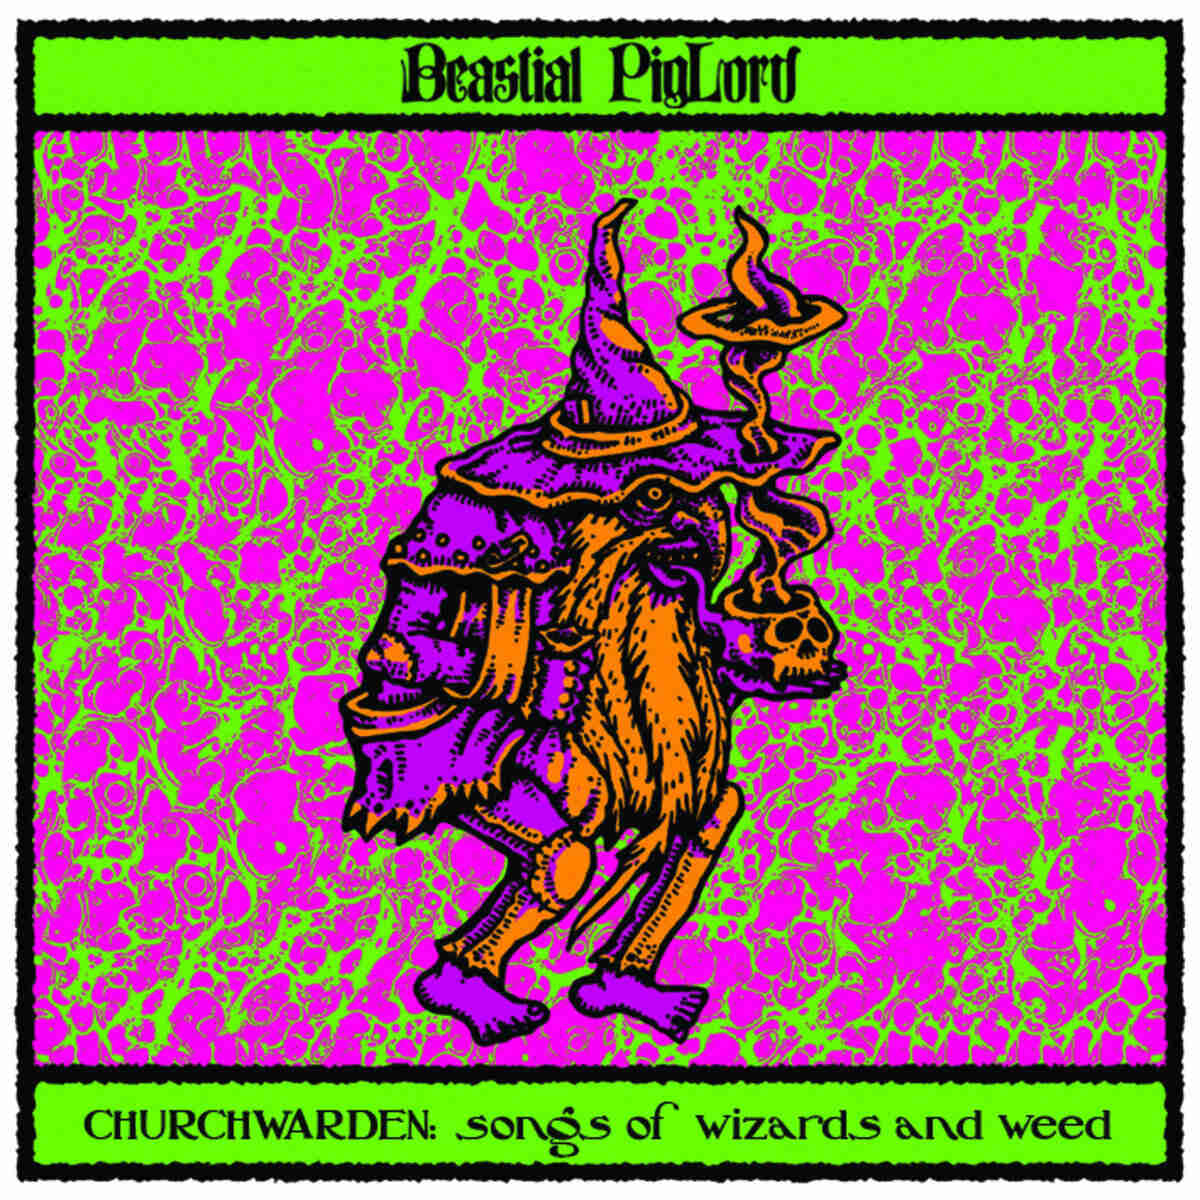 BEASTIAL PIGLORD - Churchwarden: Songs Of Wizards And Weed cover 